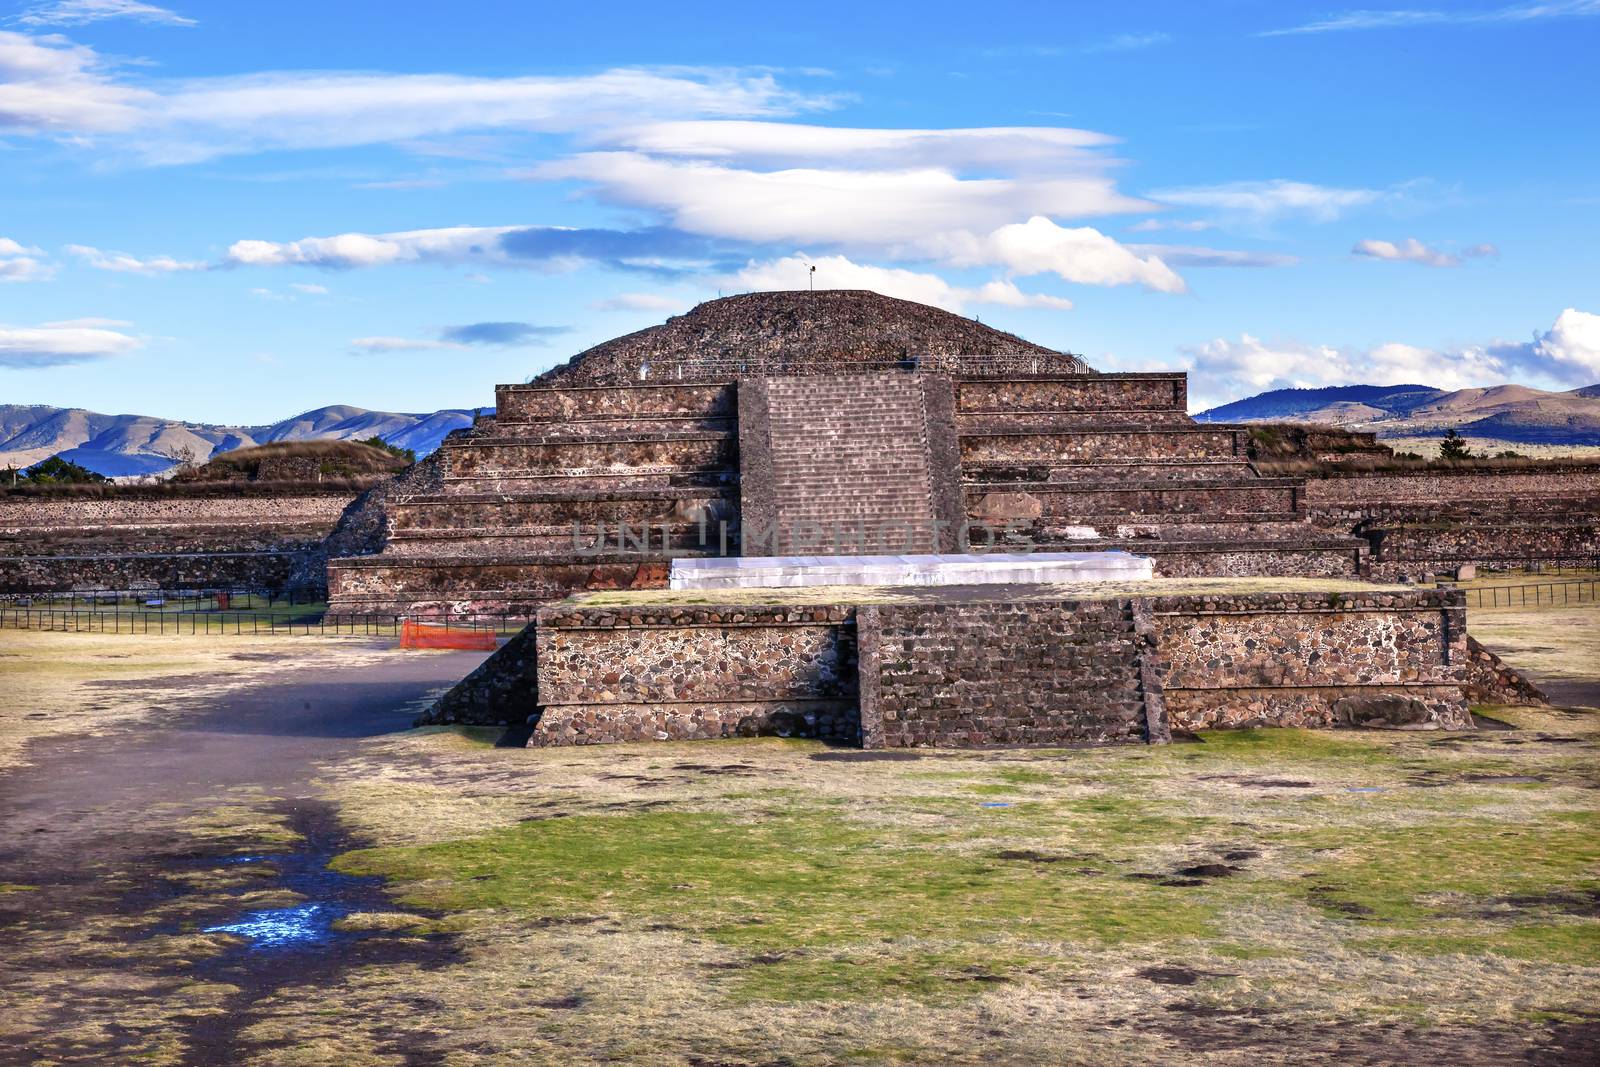 Temple of Quetzalcoatl Pyramid Teotihuacan Mexico City Mexico by bill_perry